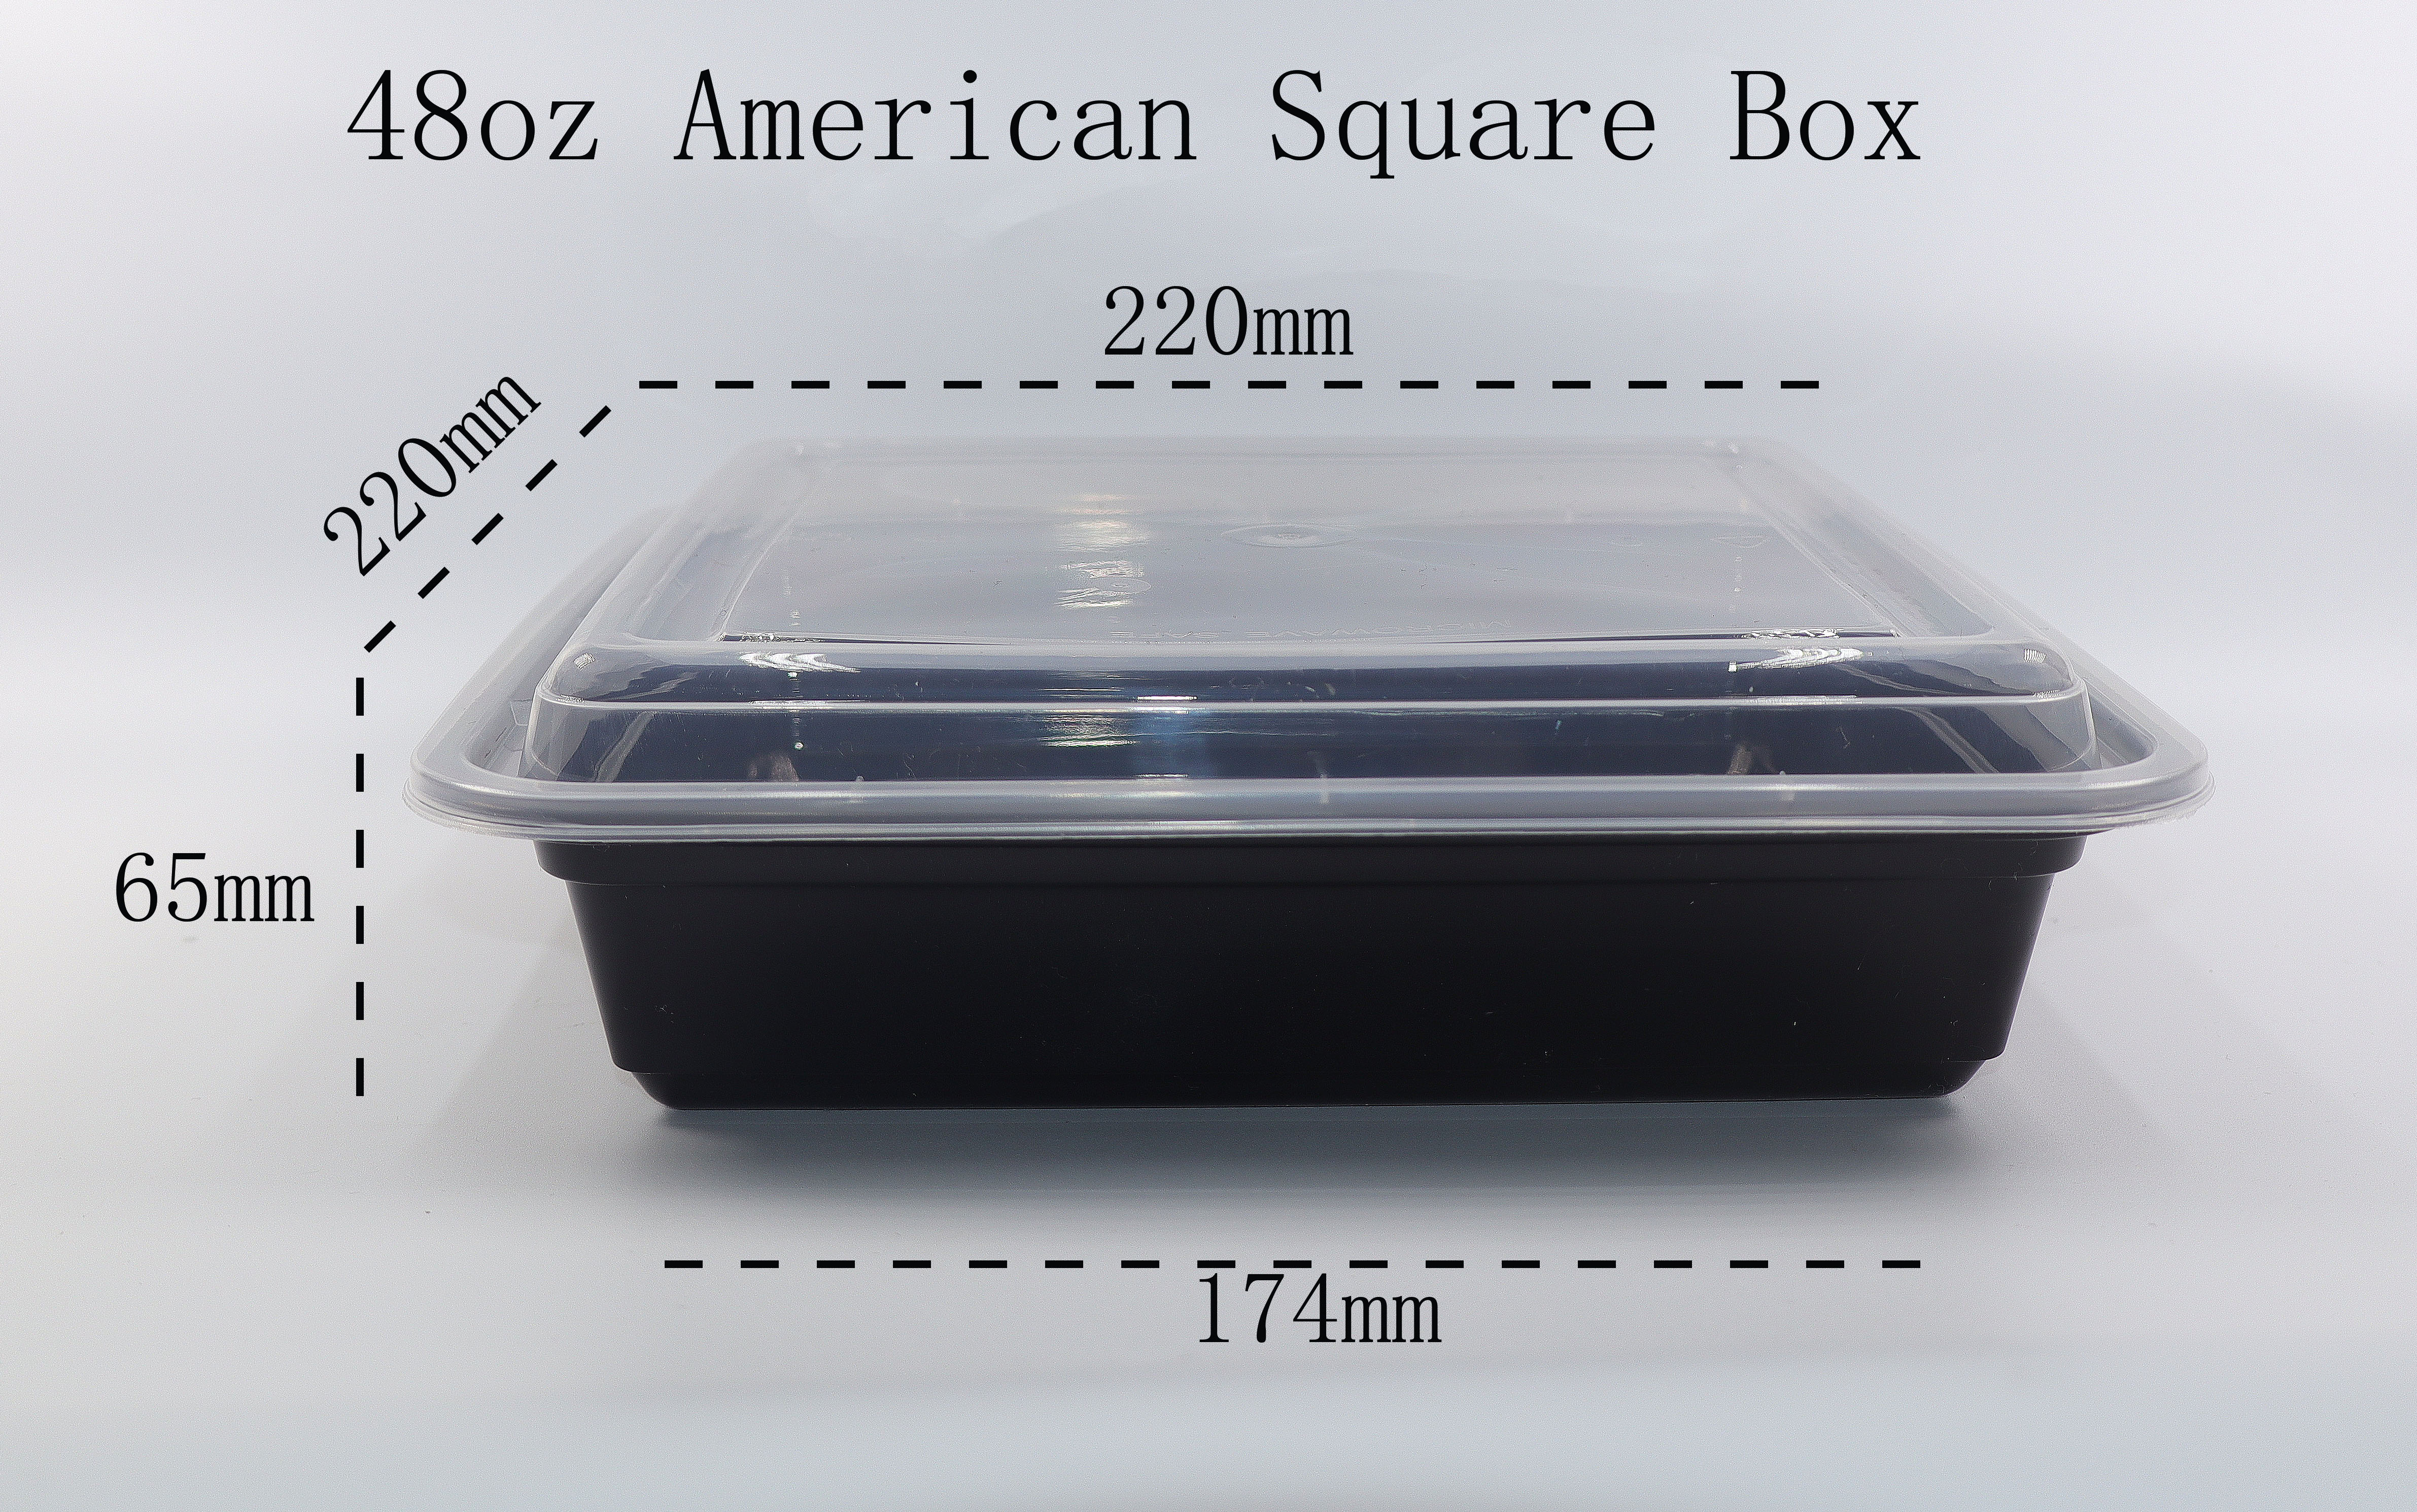 Black Rectangle Food Storage Container